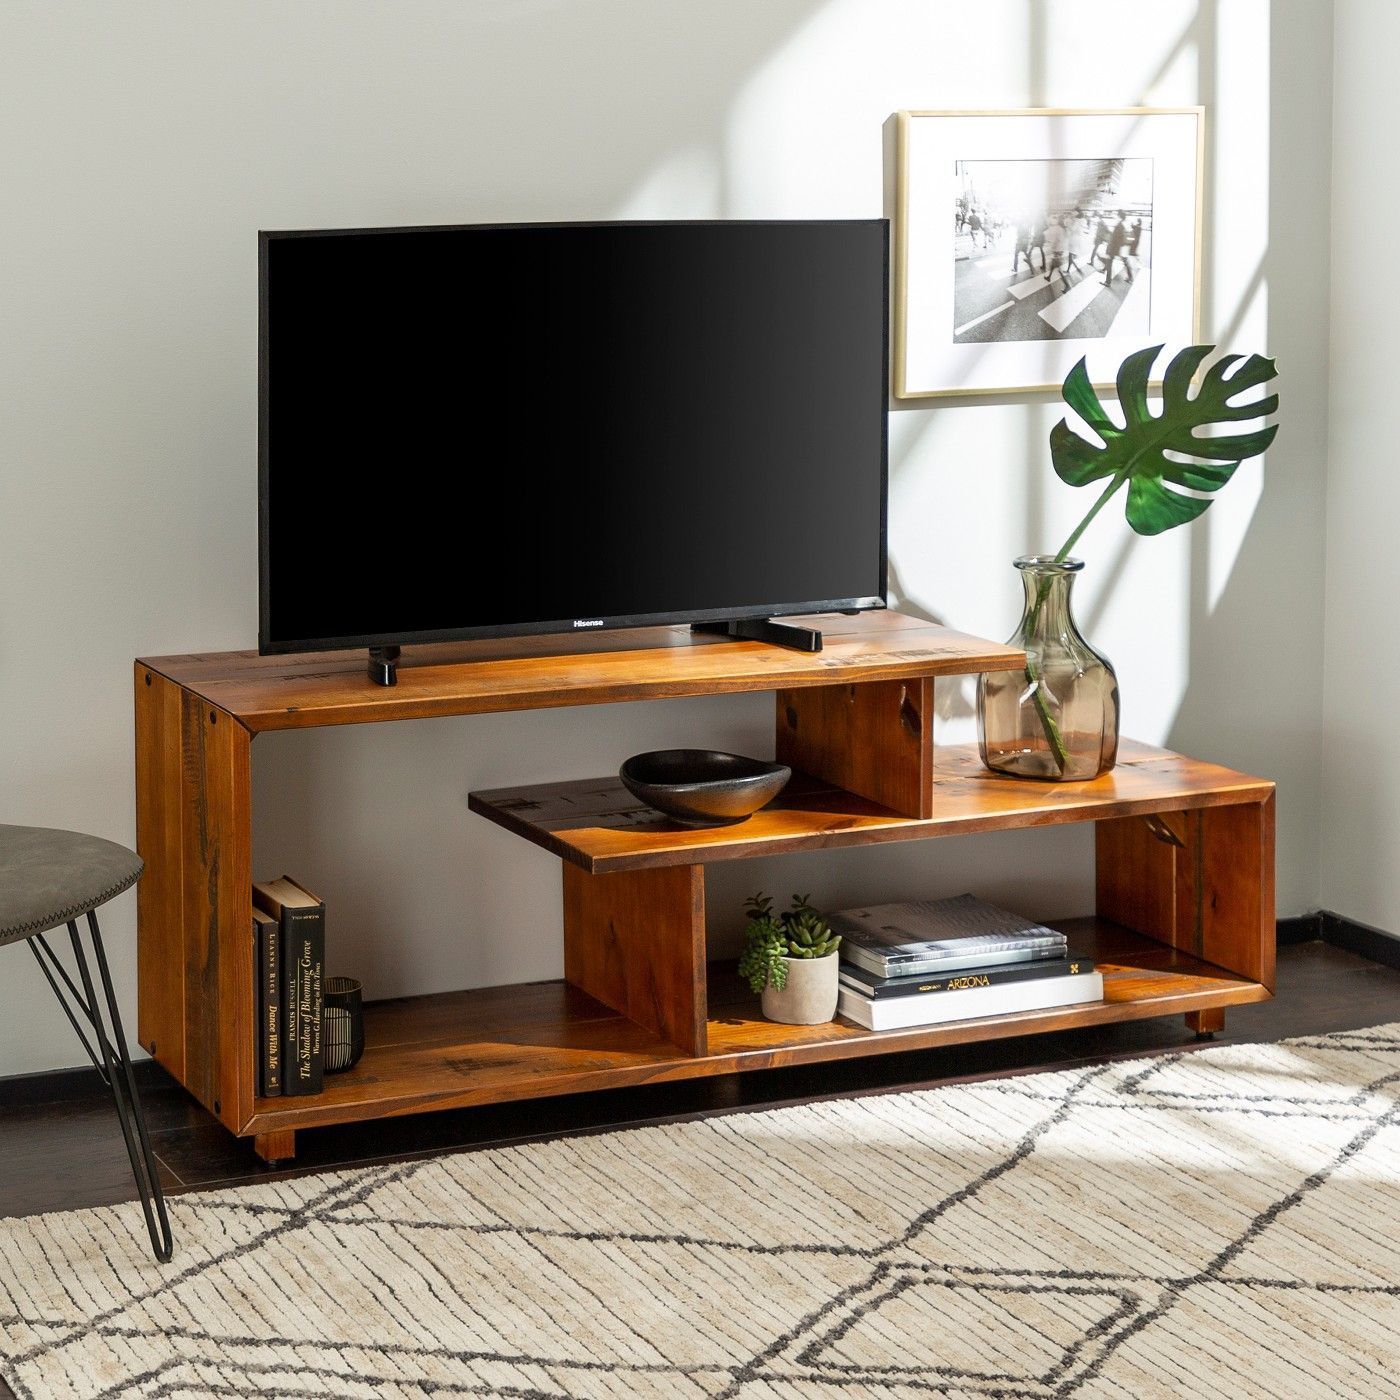 Rustic Modern Solid Wood Tv Stand For Tvs Up To 50 Throughout Contemporary Oak Tv Stands (View 7 of 15)